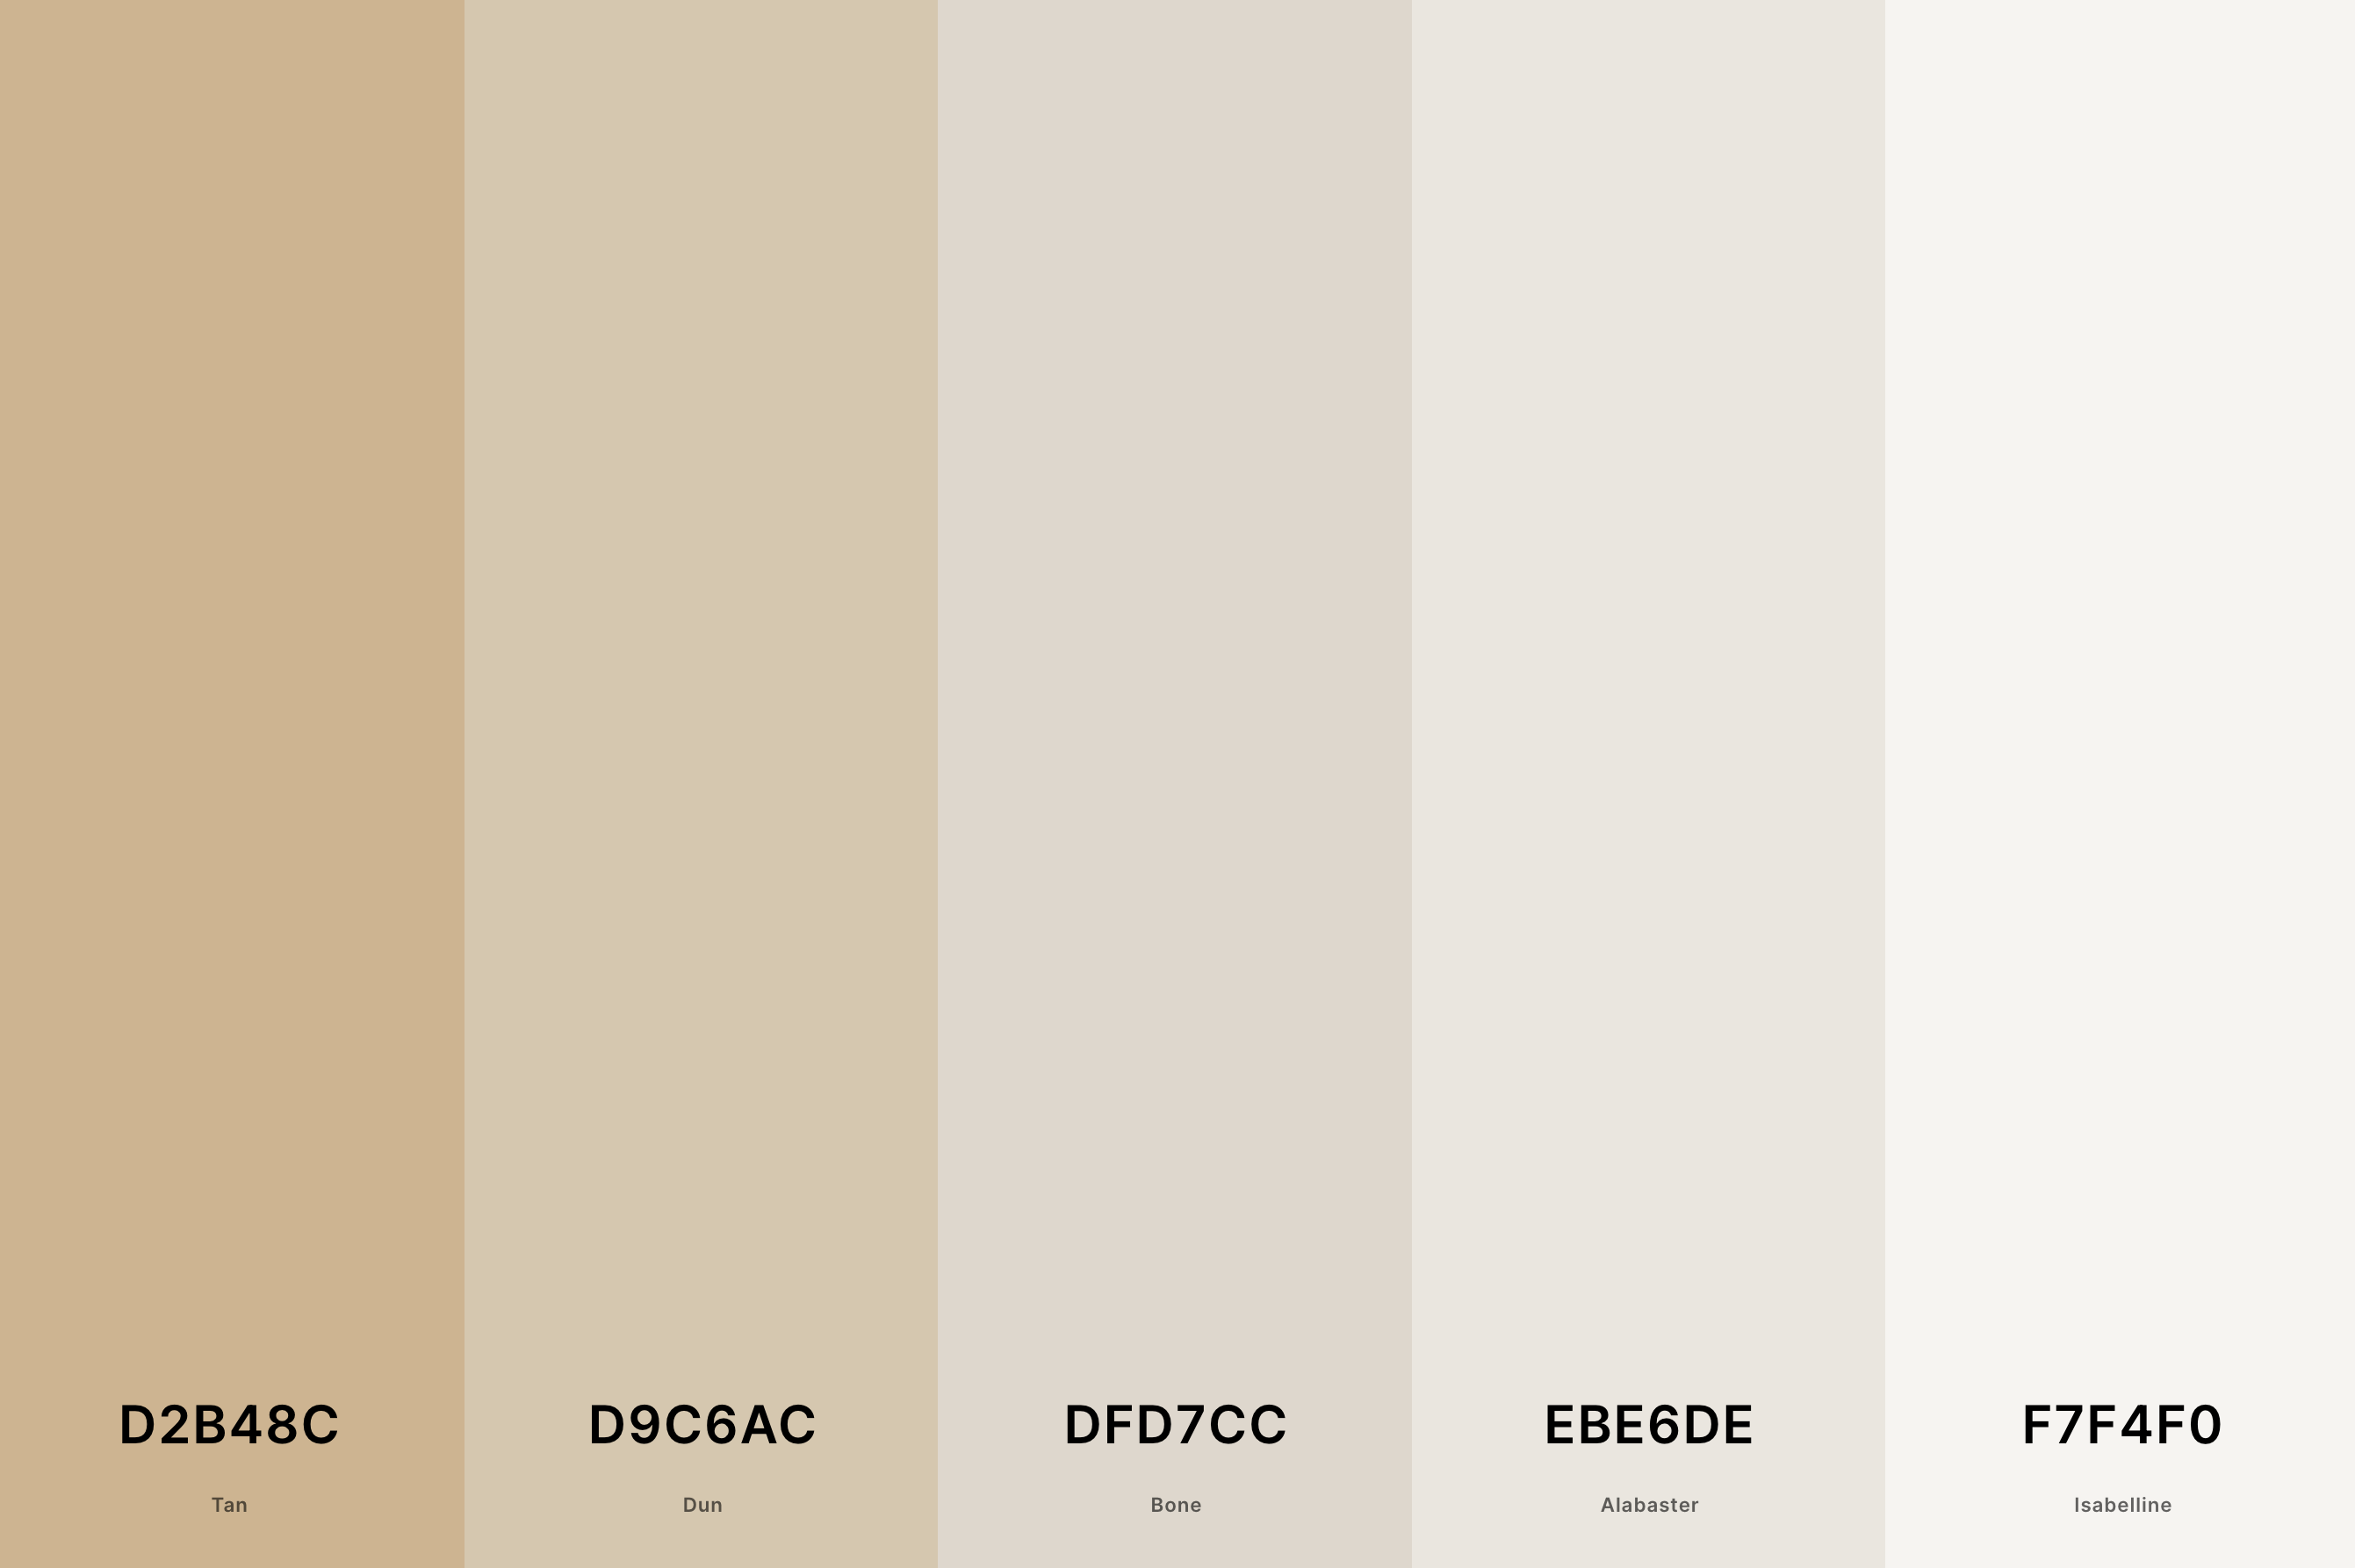 15. Tan And White Color Palette Color Palette with Tan (Hex #D2B48C) + Dun (Hex #D9C6AC) + Bone (Hex #DFD7CC) + Alabaster (Hex #EBE6DE) + Isabelline (Hex #F7F4F0) Color Palette with Hex Codes